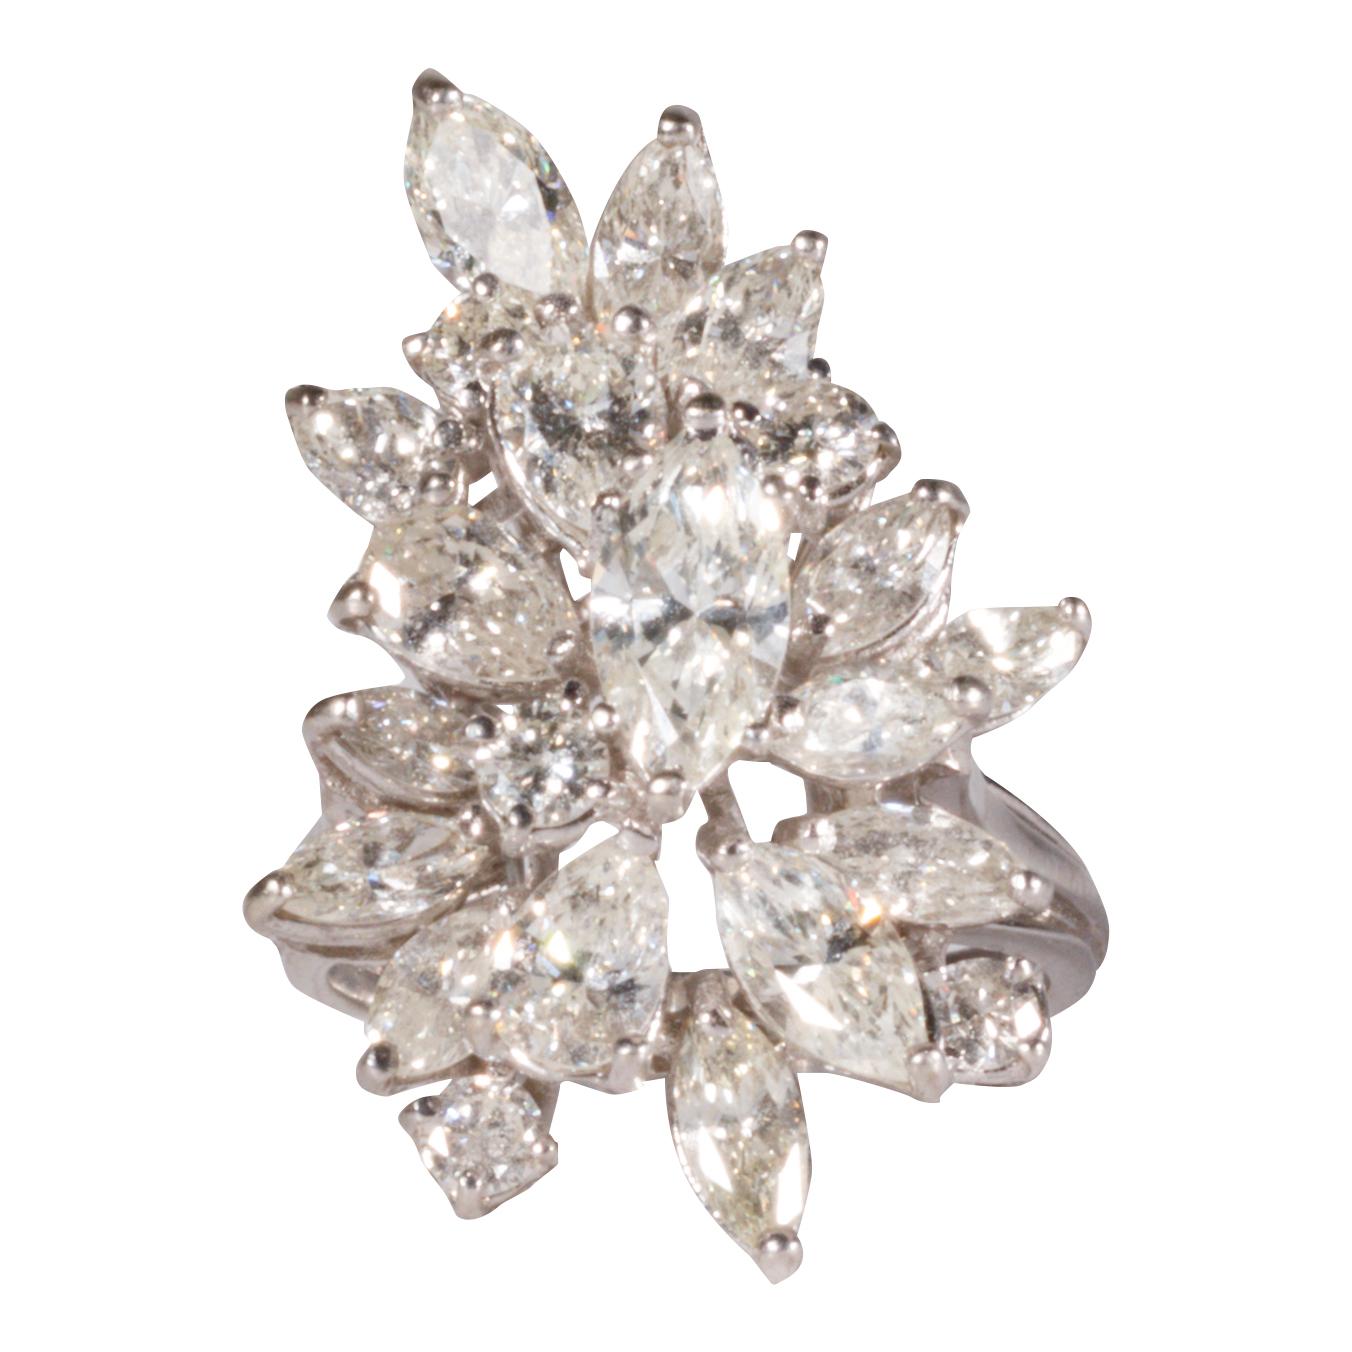 Beautiful large 18 Kt white gold diamond waterfall cluster ring, pear-shaped, round, with diamonds. 4.94ct marquise diamond tw.

PERIOD: Estimated 1940-50s

ORIGIN: U.S.

SIZE: Ring Sz: 7.5 Face: H1 1/4